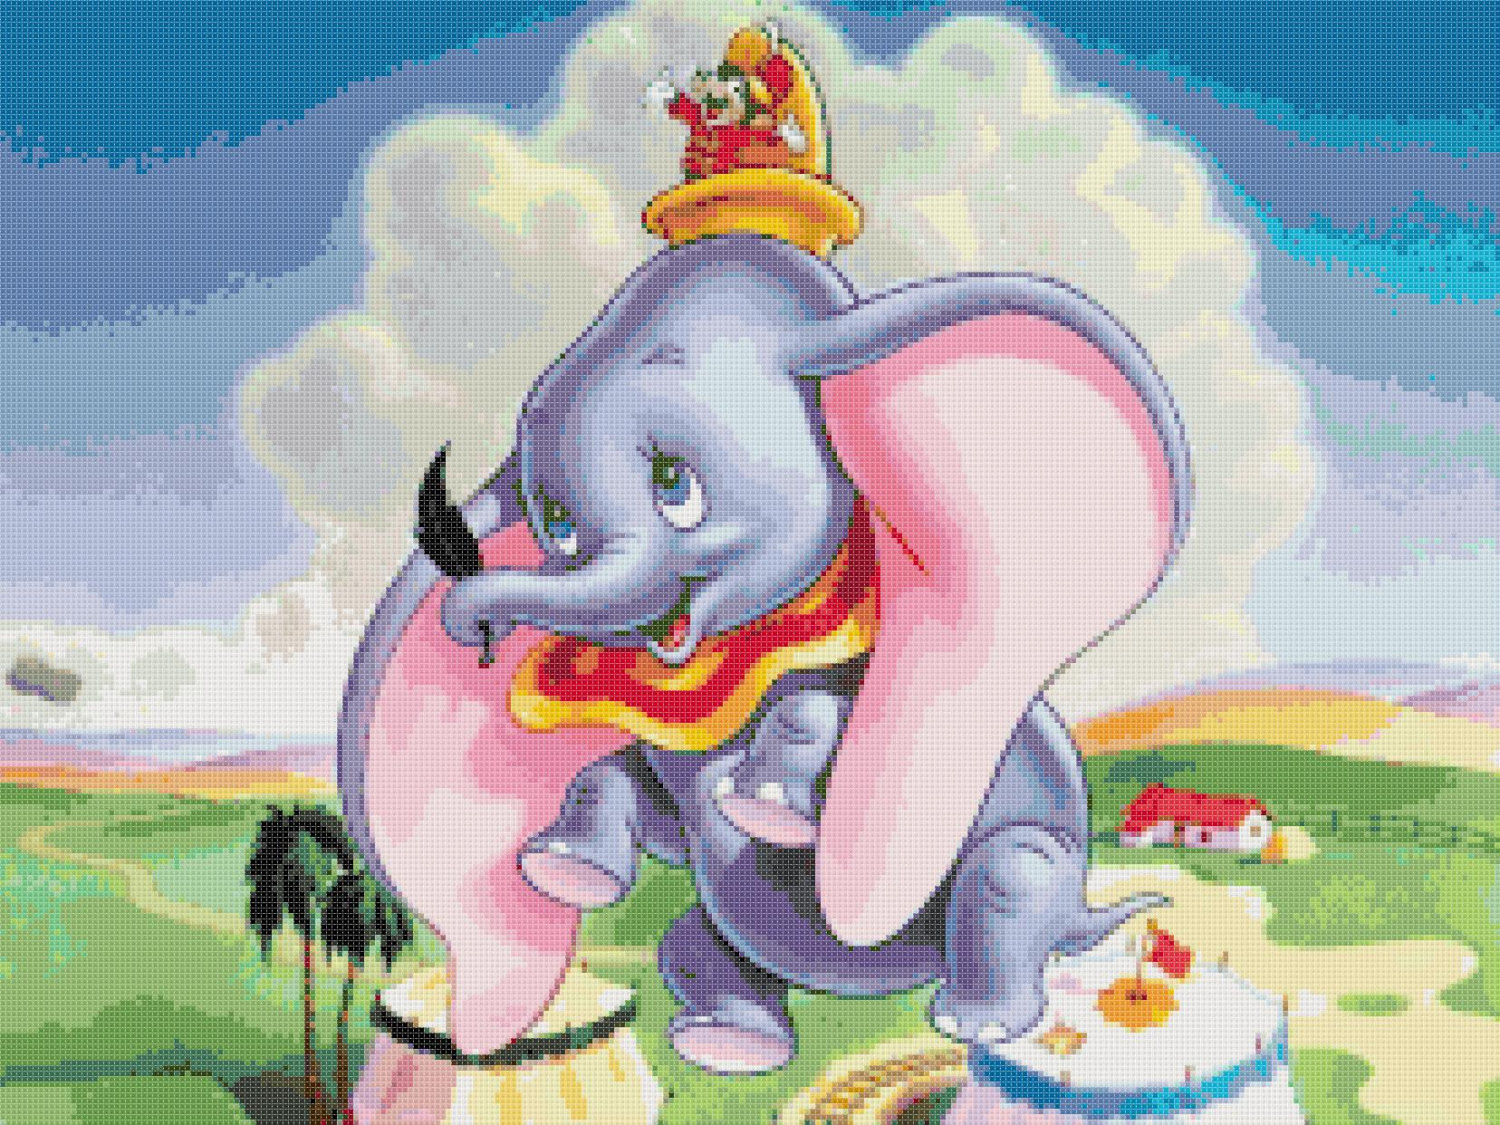 counted Cross stitch pattern Dumbo in the sky disney 276x207 stitches BN967